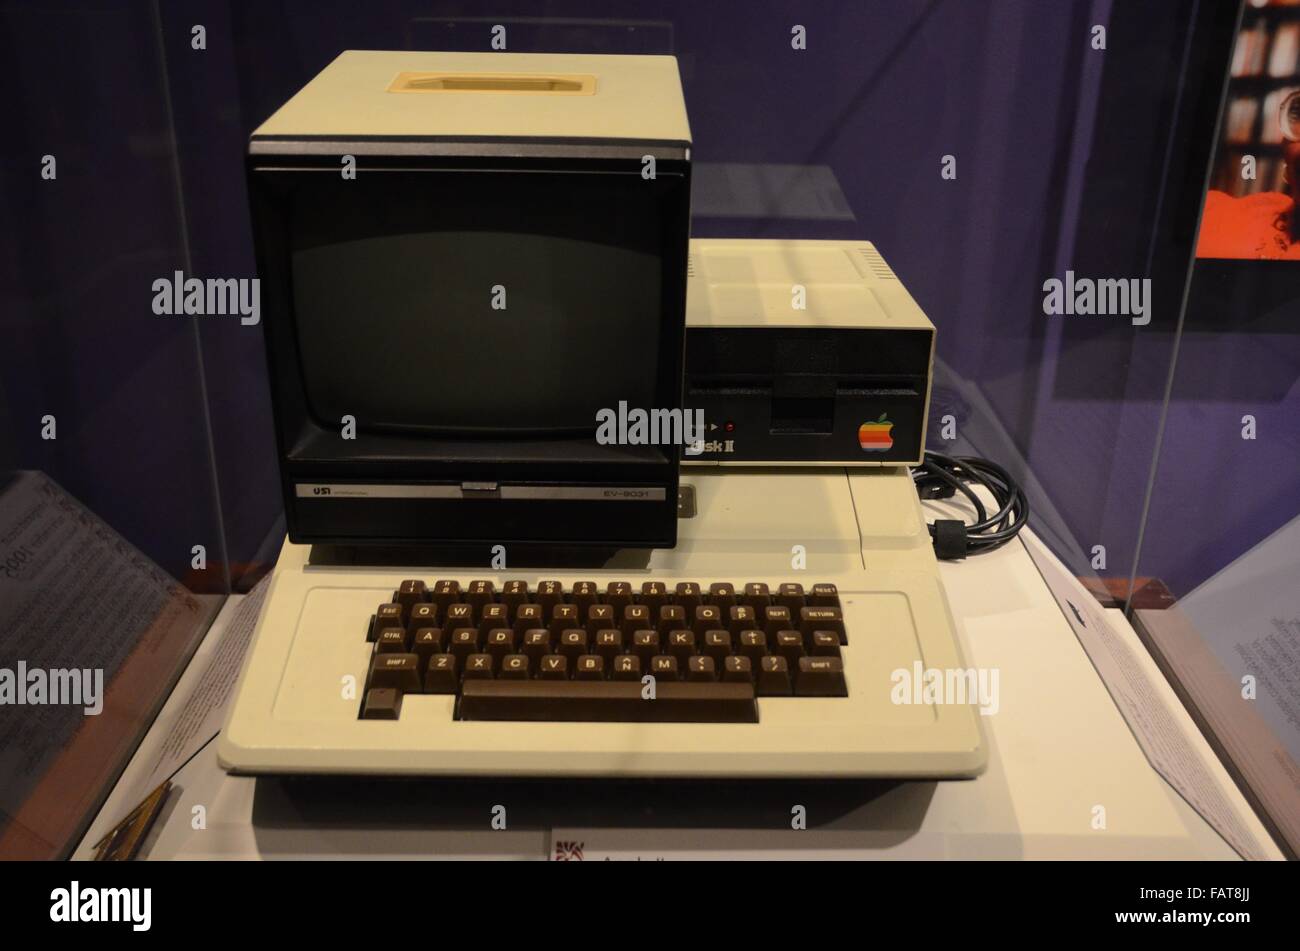 National Museum of American History-Apple 2-Computer der 1980er Jahre Stockfoto